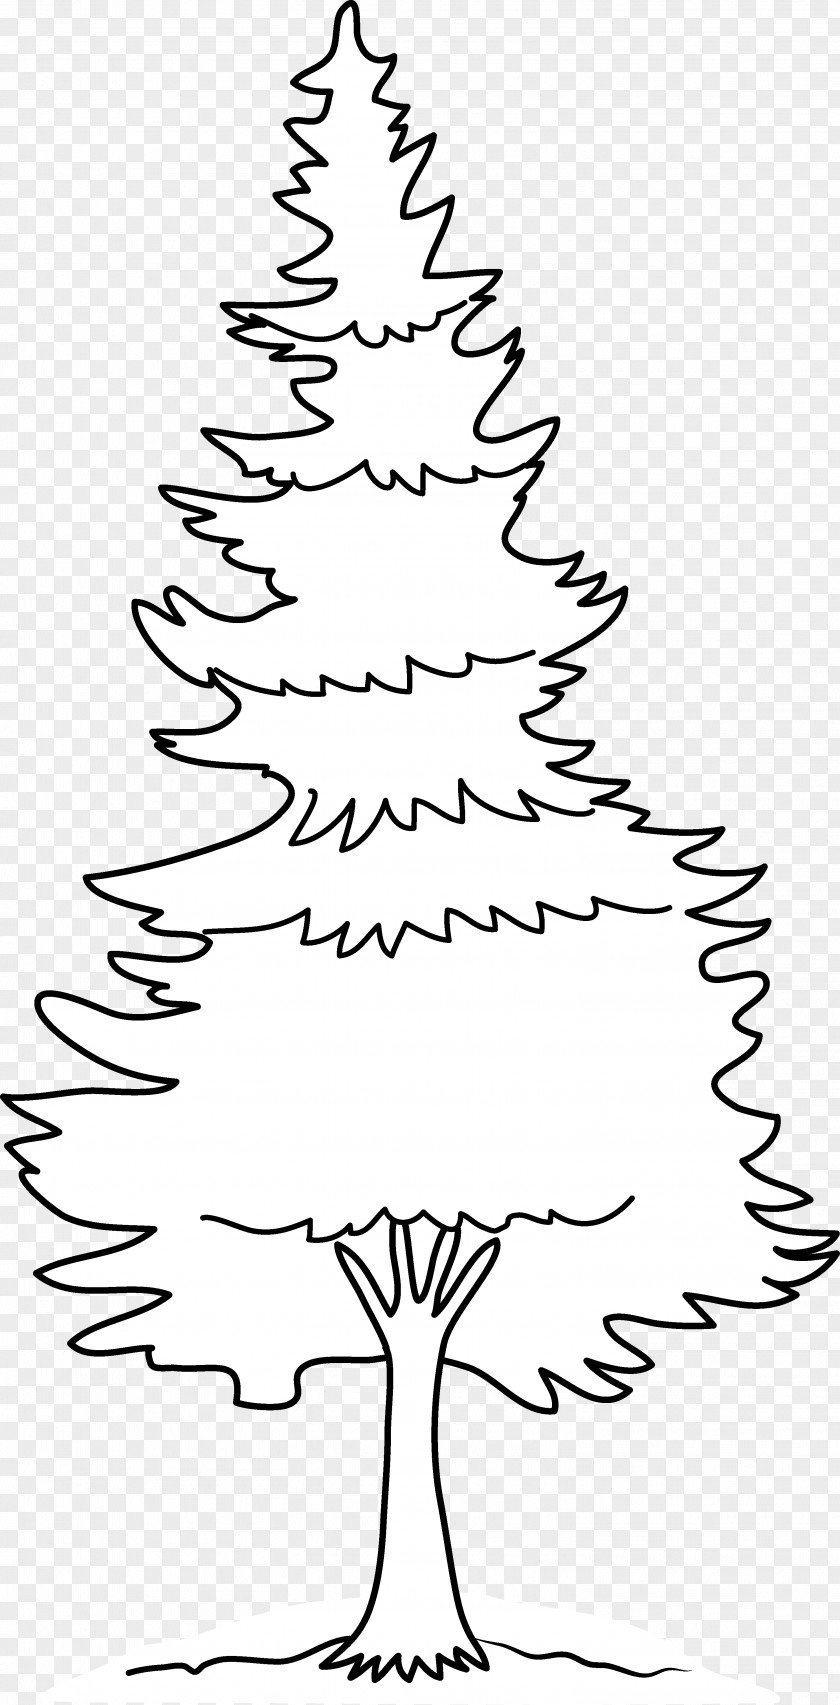 Fir-tree Eastern White Pine Drawing Clip Art PNG